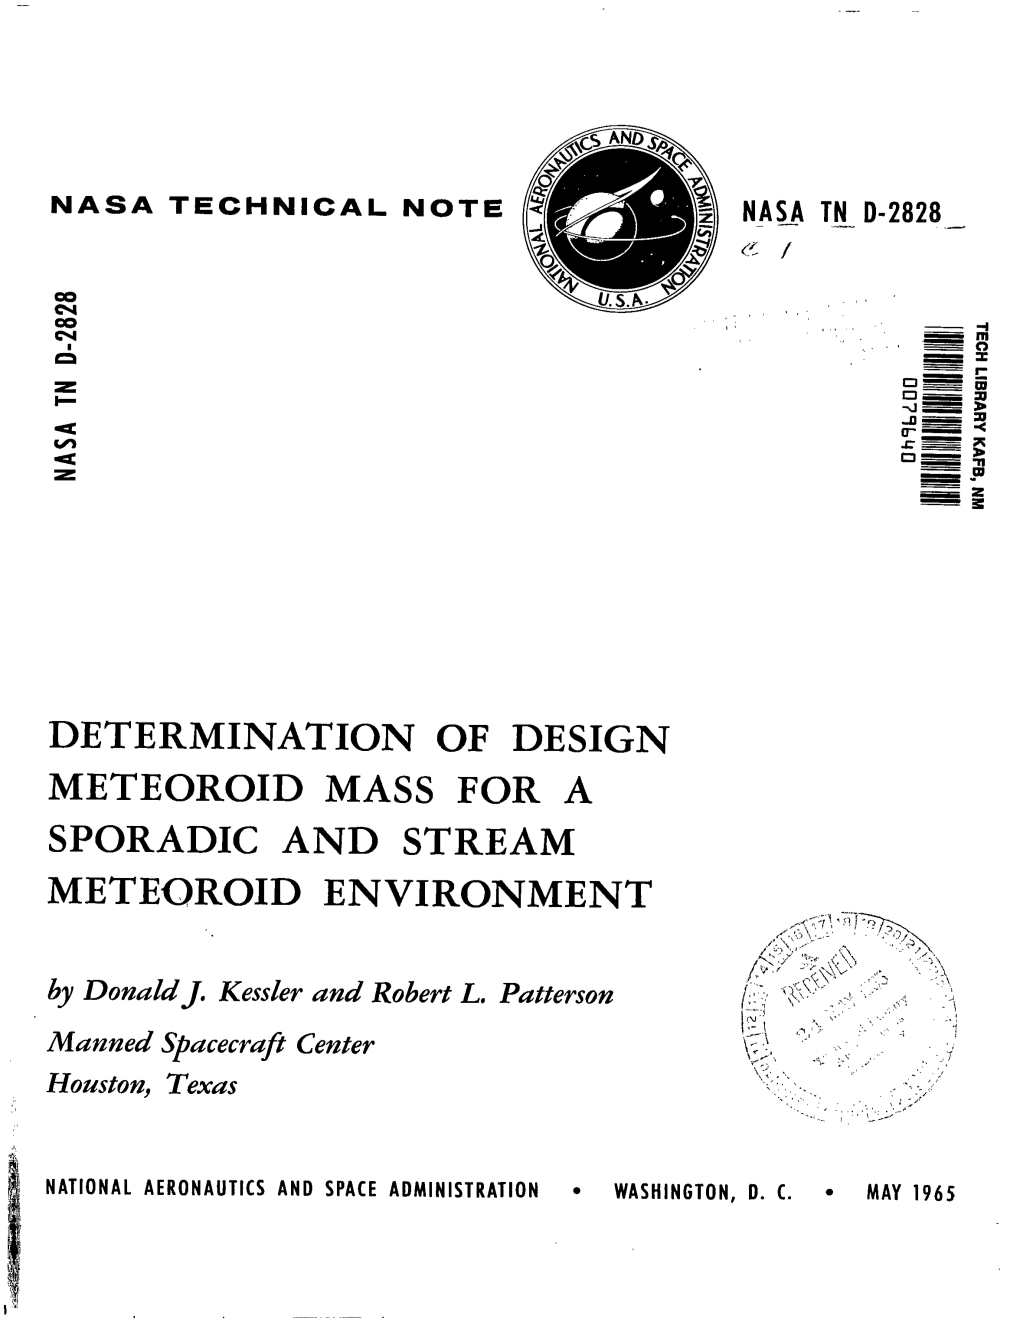 Determination of Design Meteoroid Mass for a Sporadic and Stream Meteoroid Environment